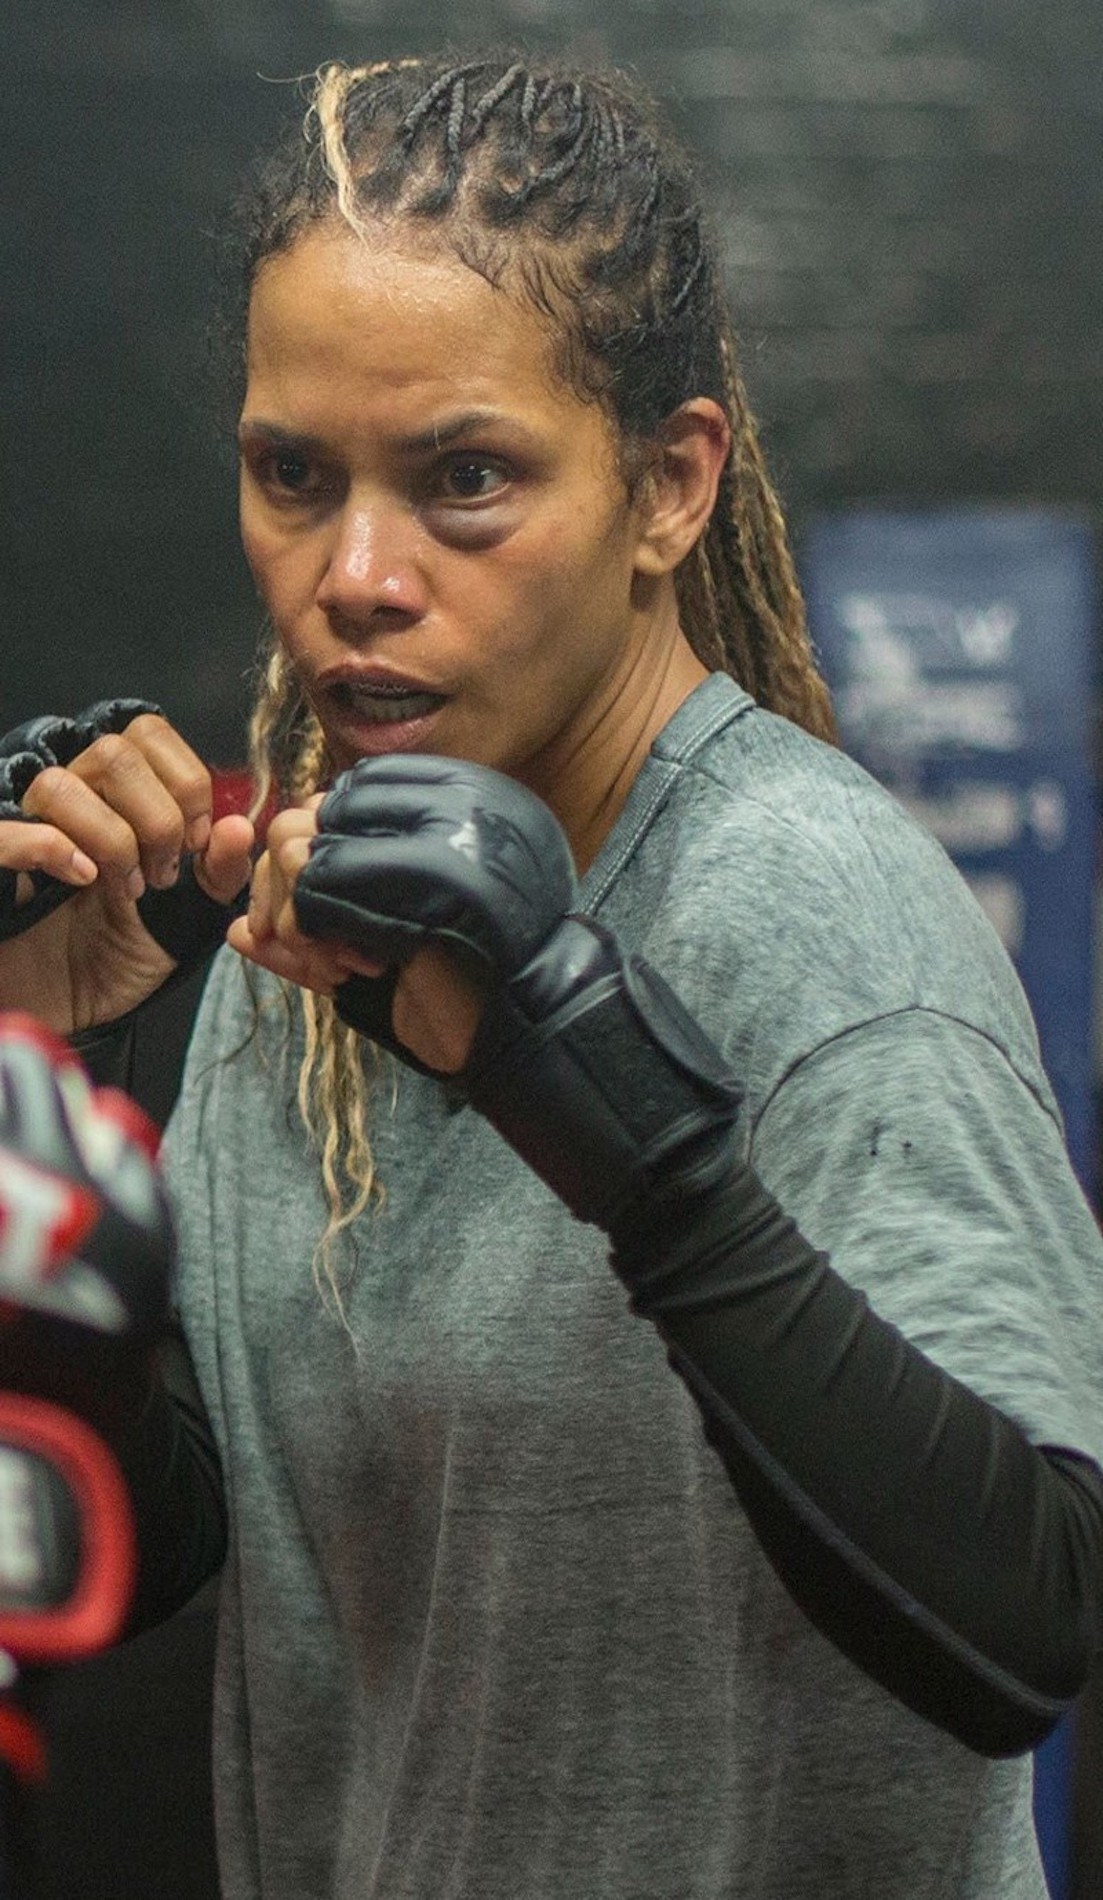 Halle Berry as a boxer in the ring with her eye bruised